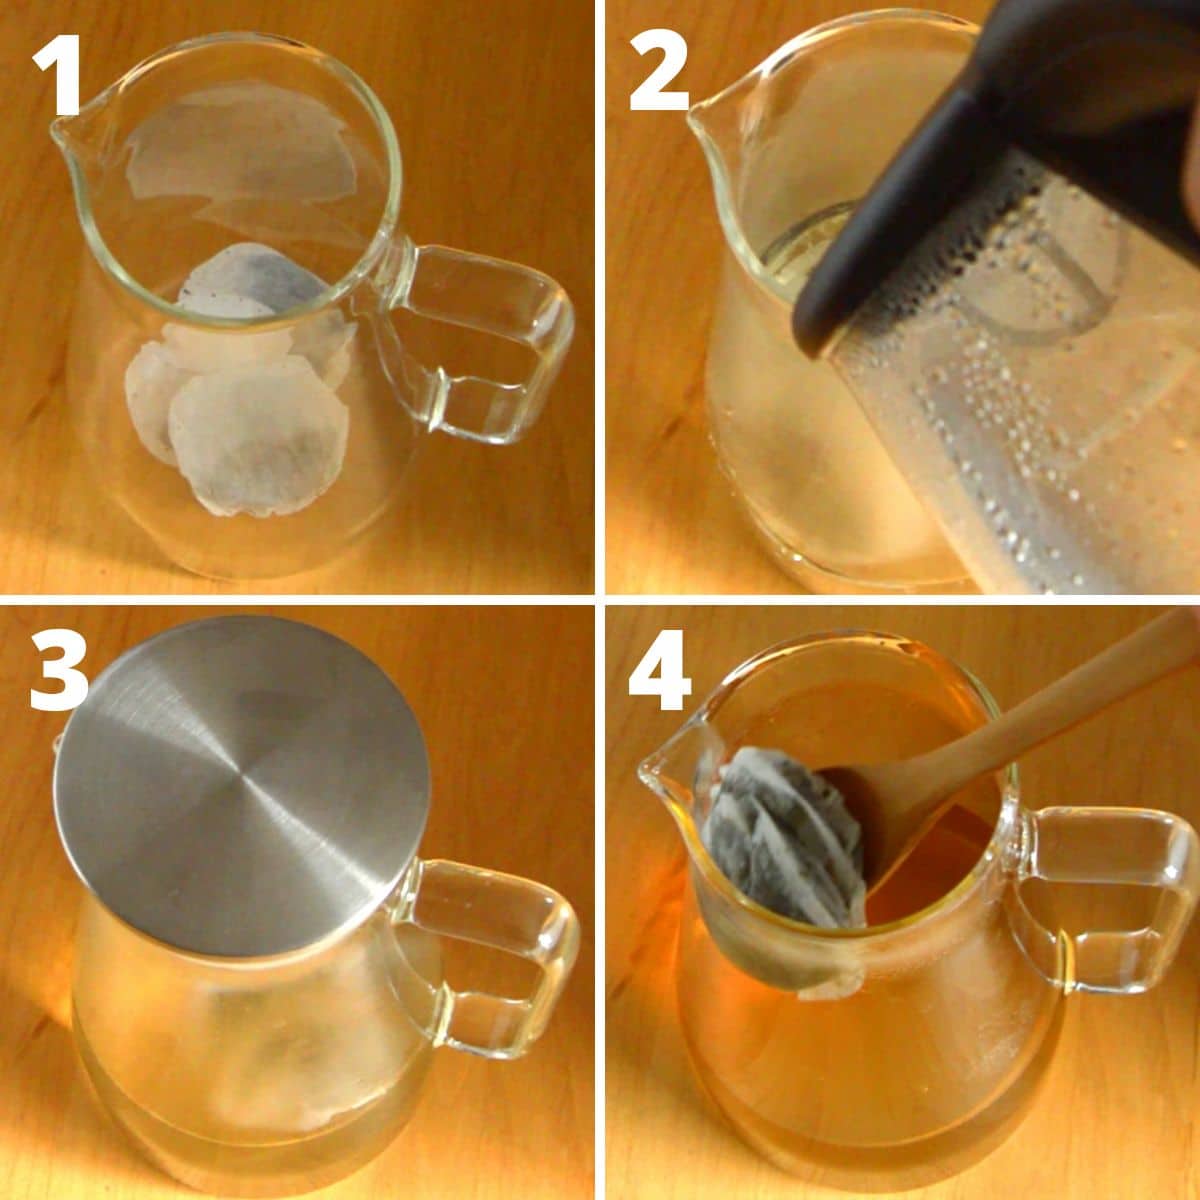 college of 4 images showing the process of making green tea in a glass jug.